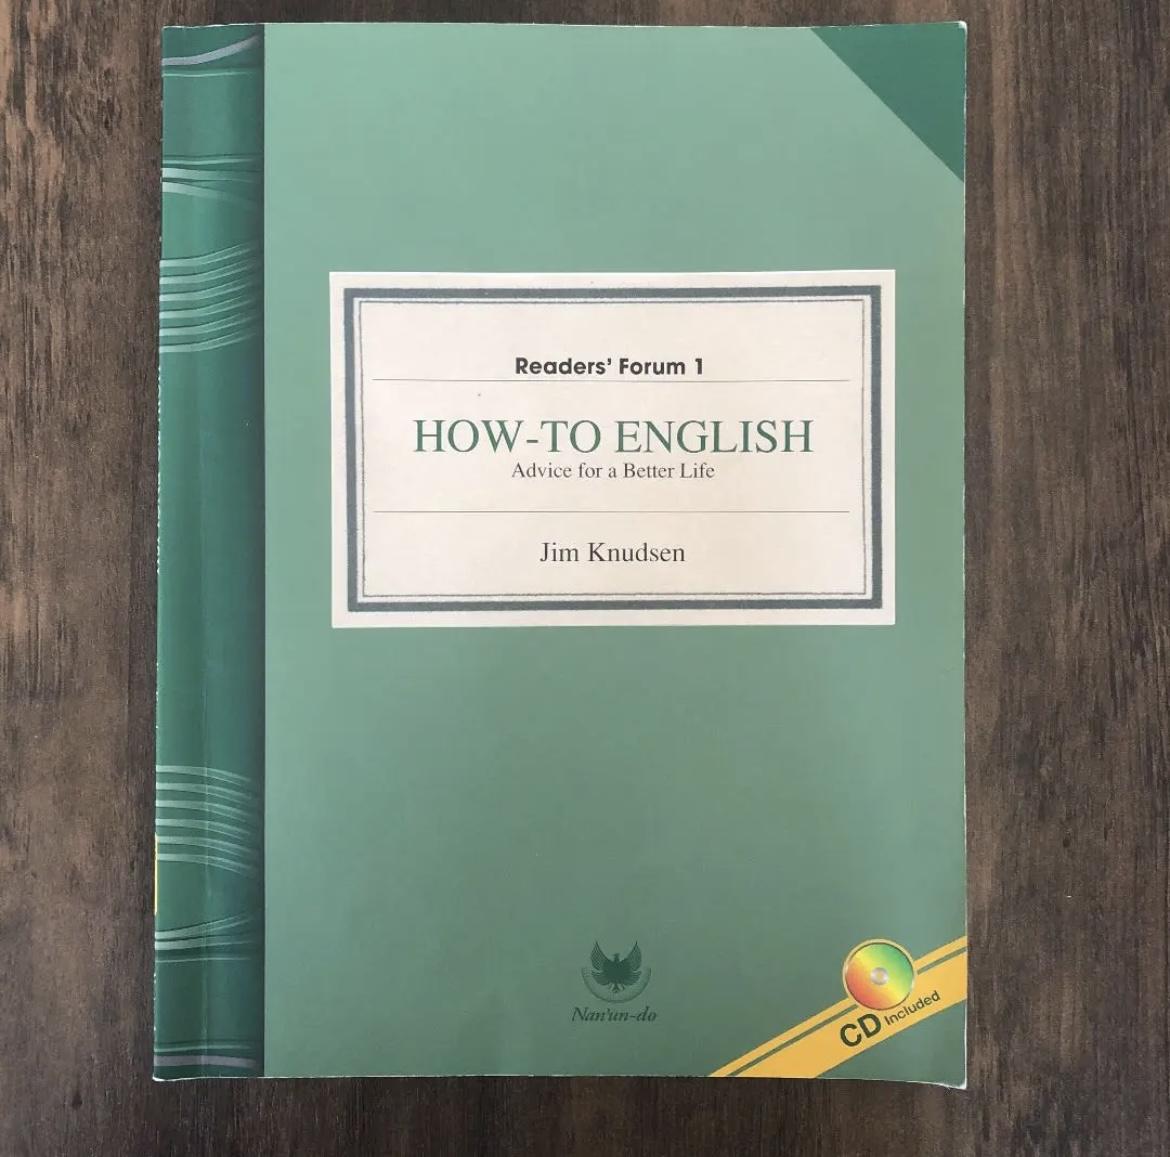 Readers' Forum 1 How - To English